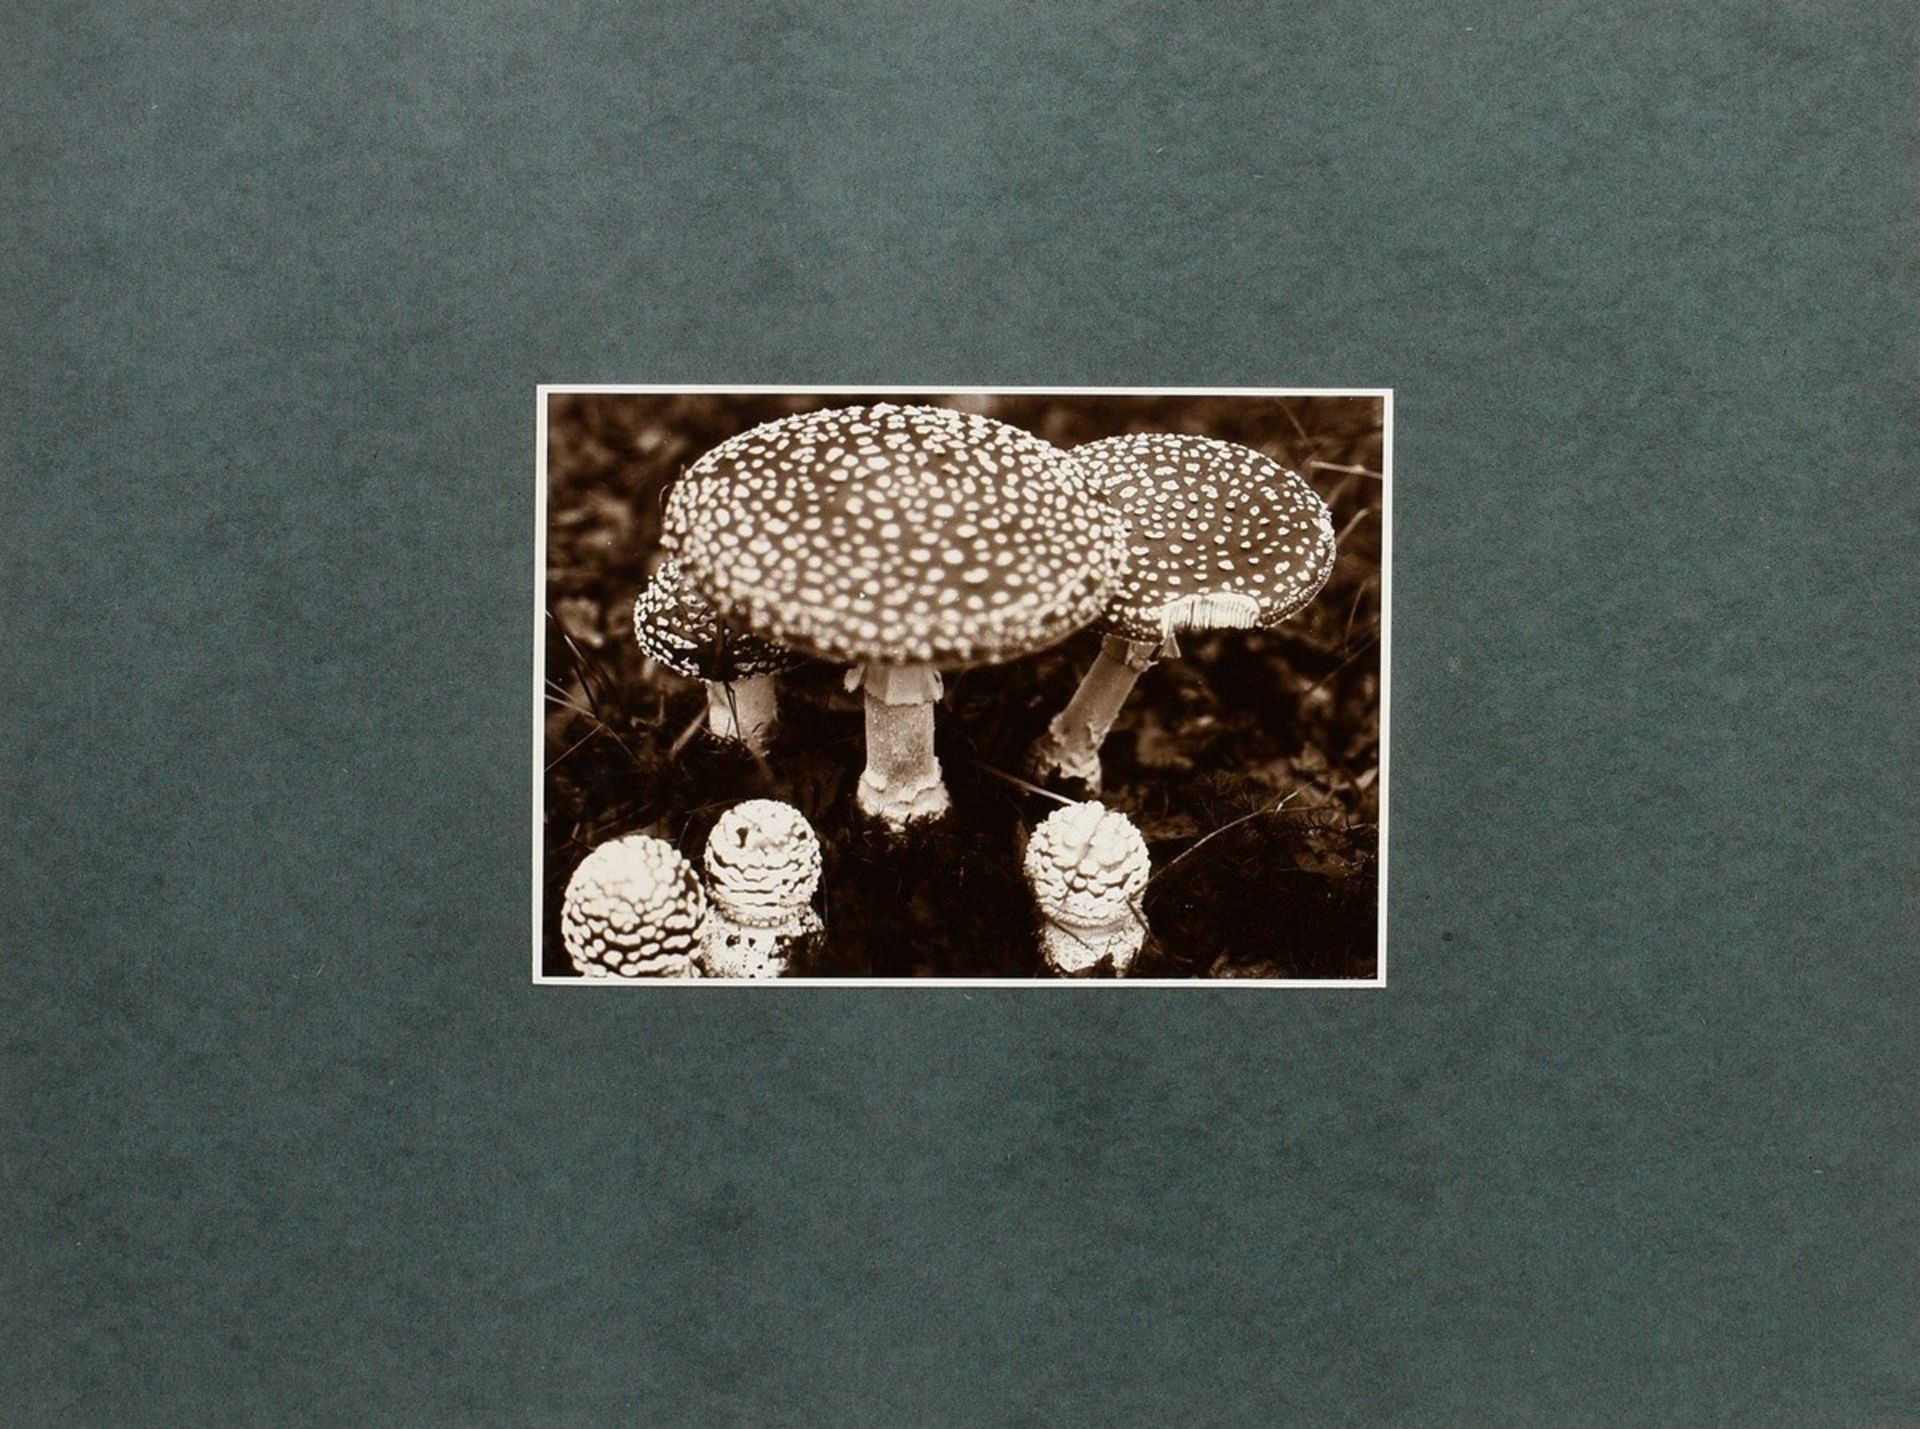 6 Koch, Fred (1904-1947) "Ice Crystals, Mushrooms, Animals", photographs mounted on cardboard, insc - Image 6 of 20